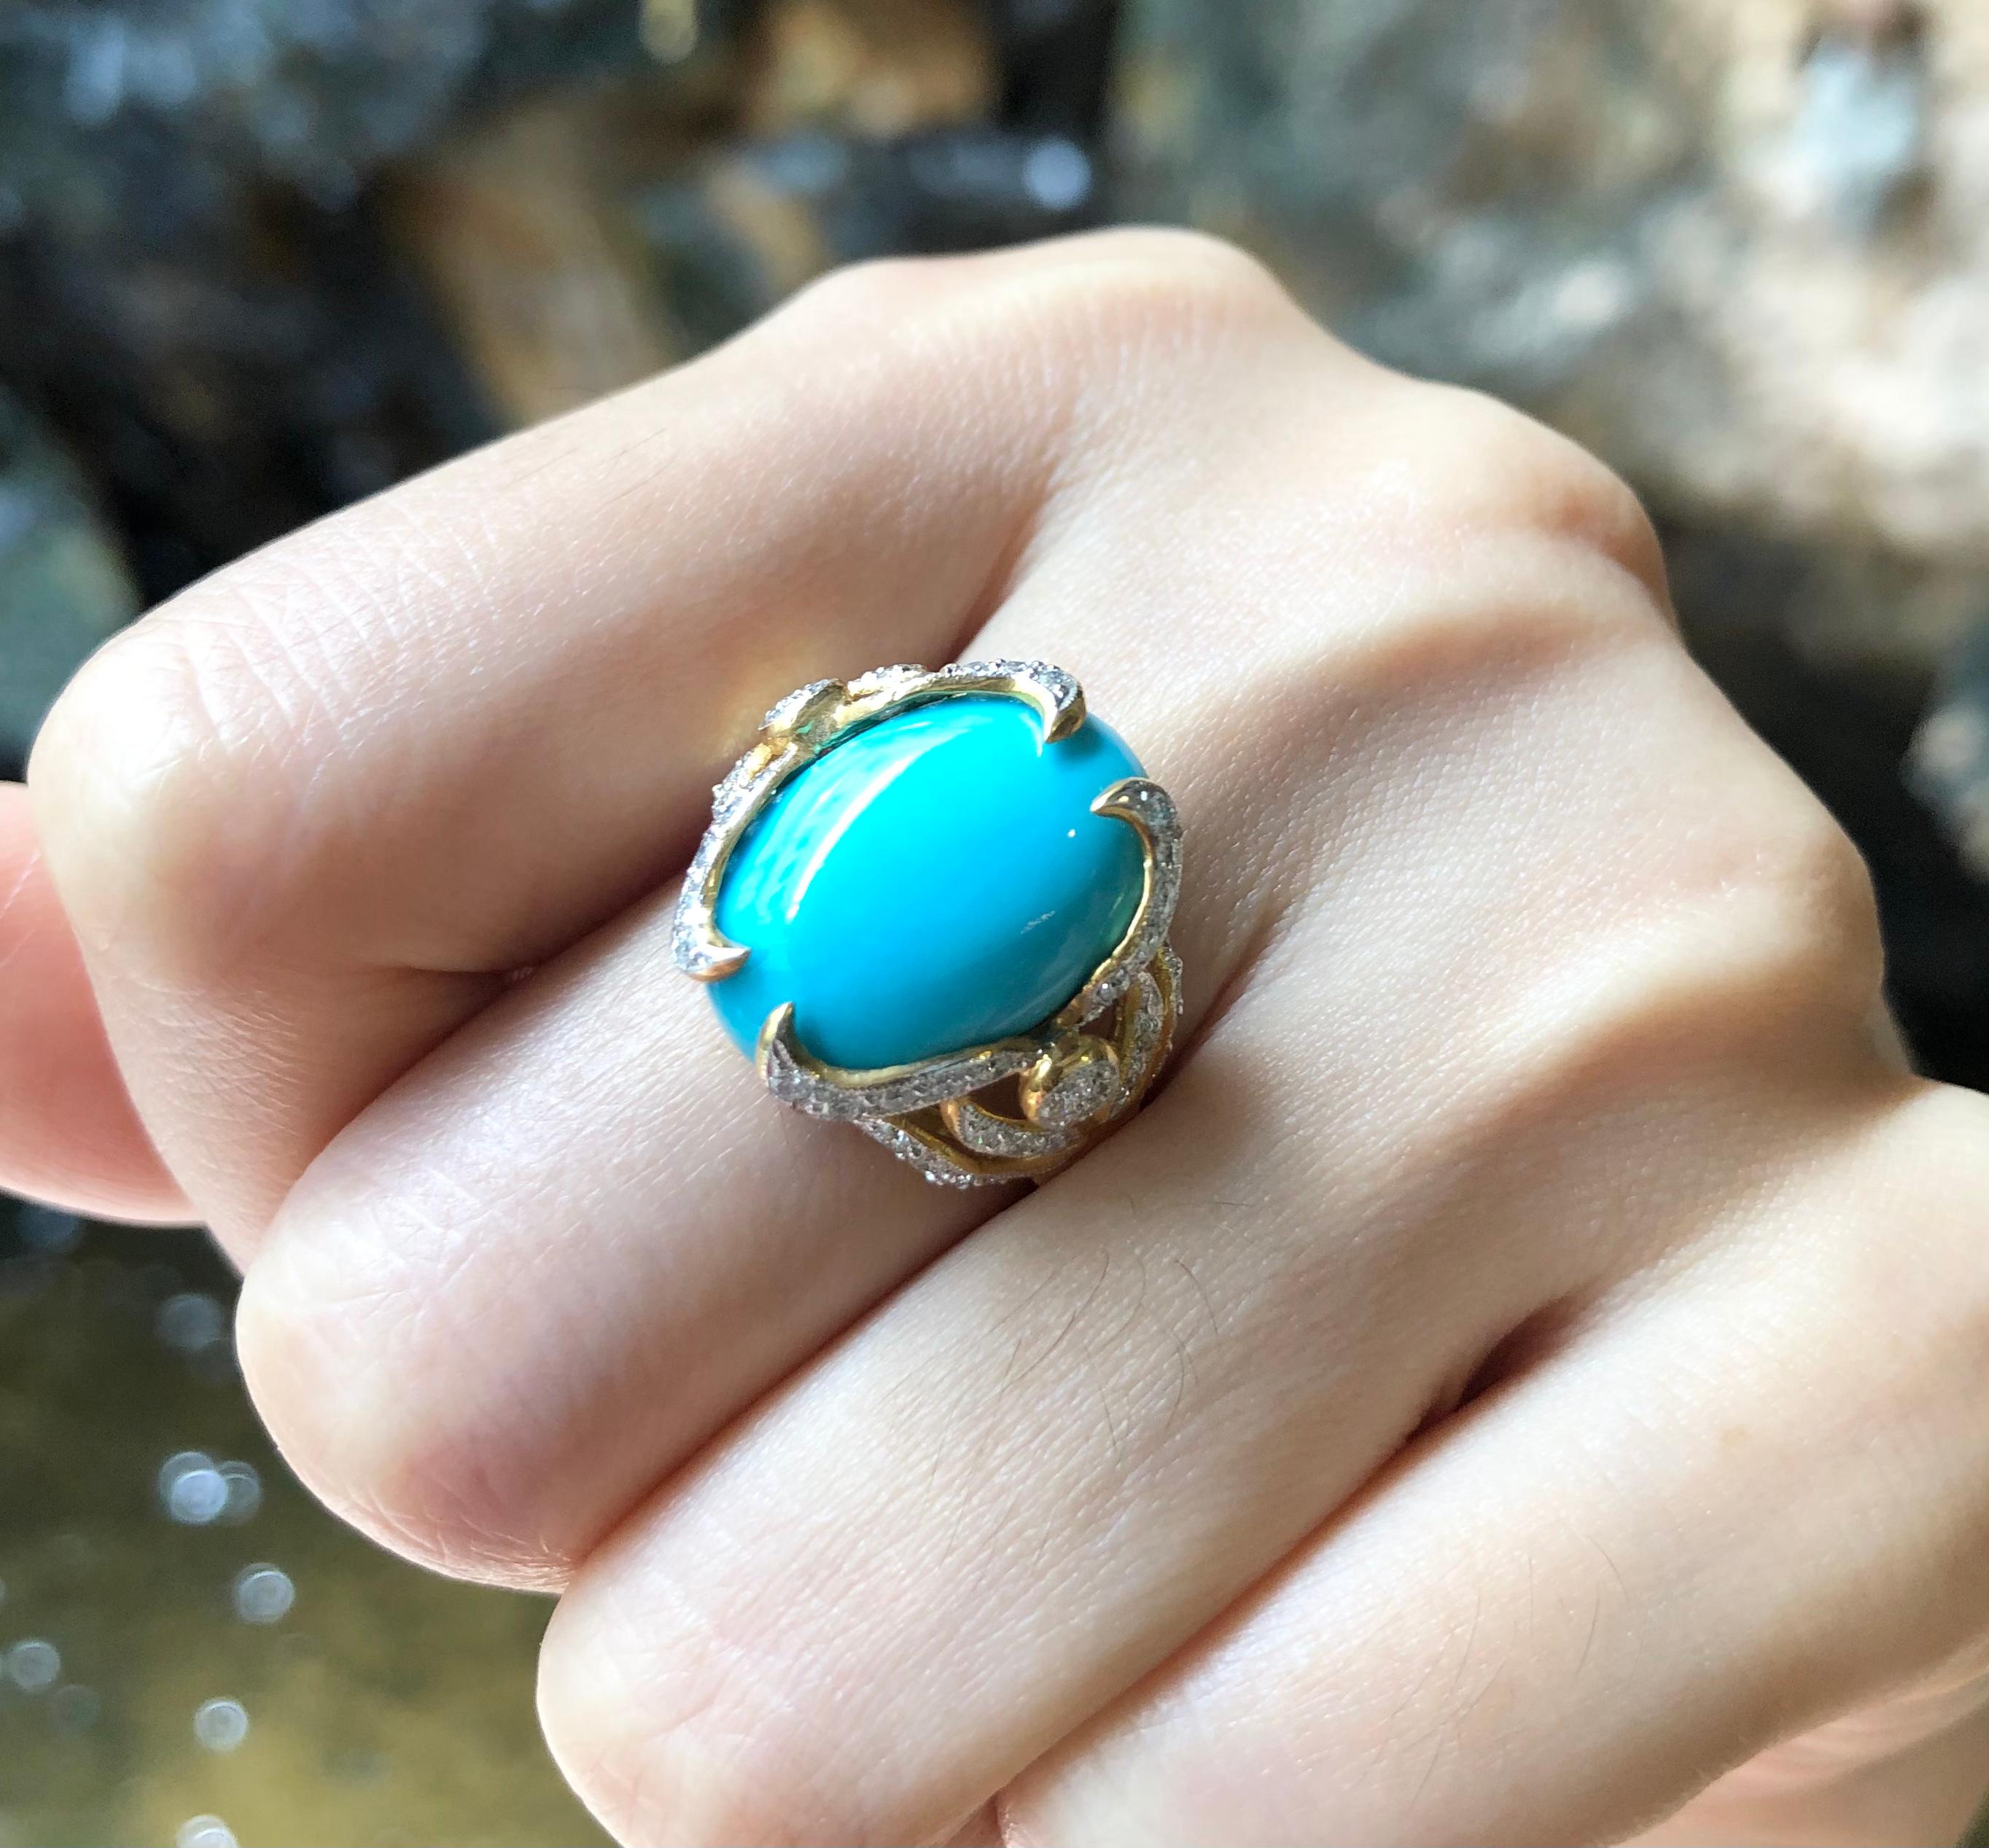 Turquoise 6.41 carats with Diamond 0.50 carat Ring set in 18 Karat Gold Settings

Width:  1.6 cm 
Length:  1.6 cm
Ring Size: 53
Total Weight: 7.61 grams

